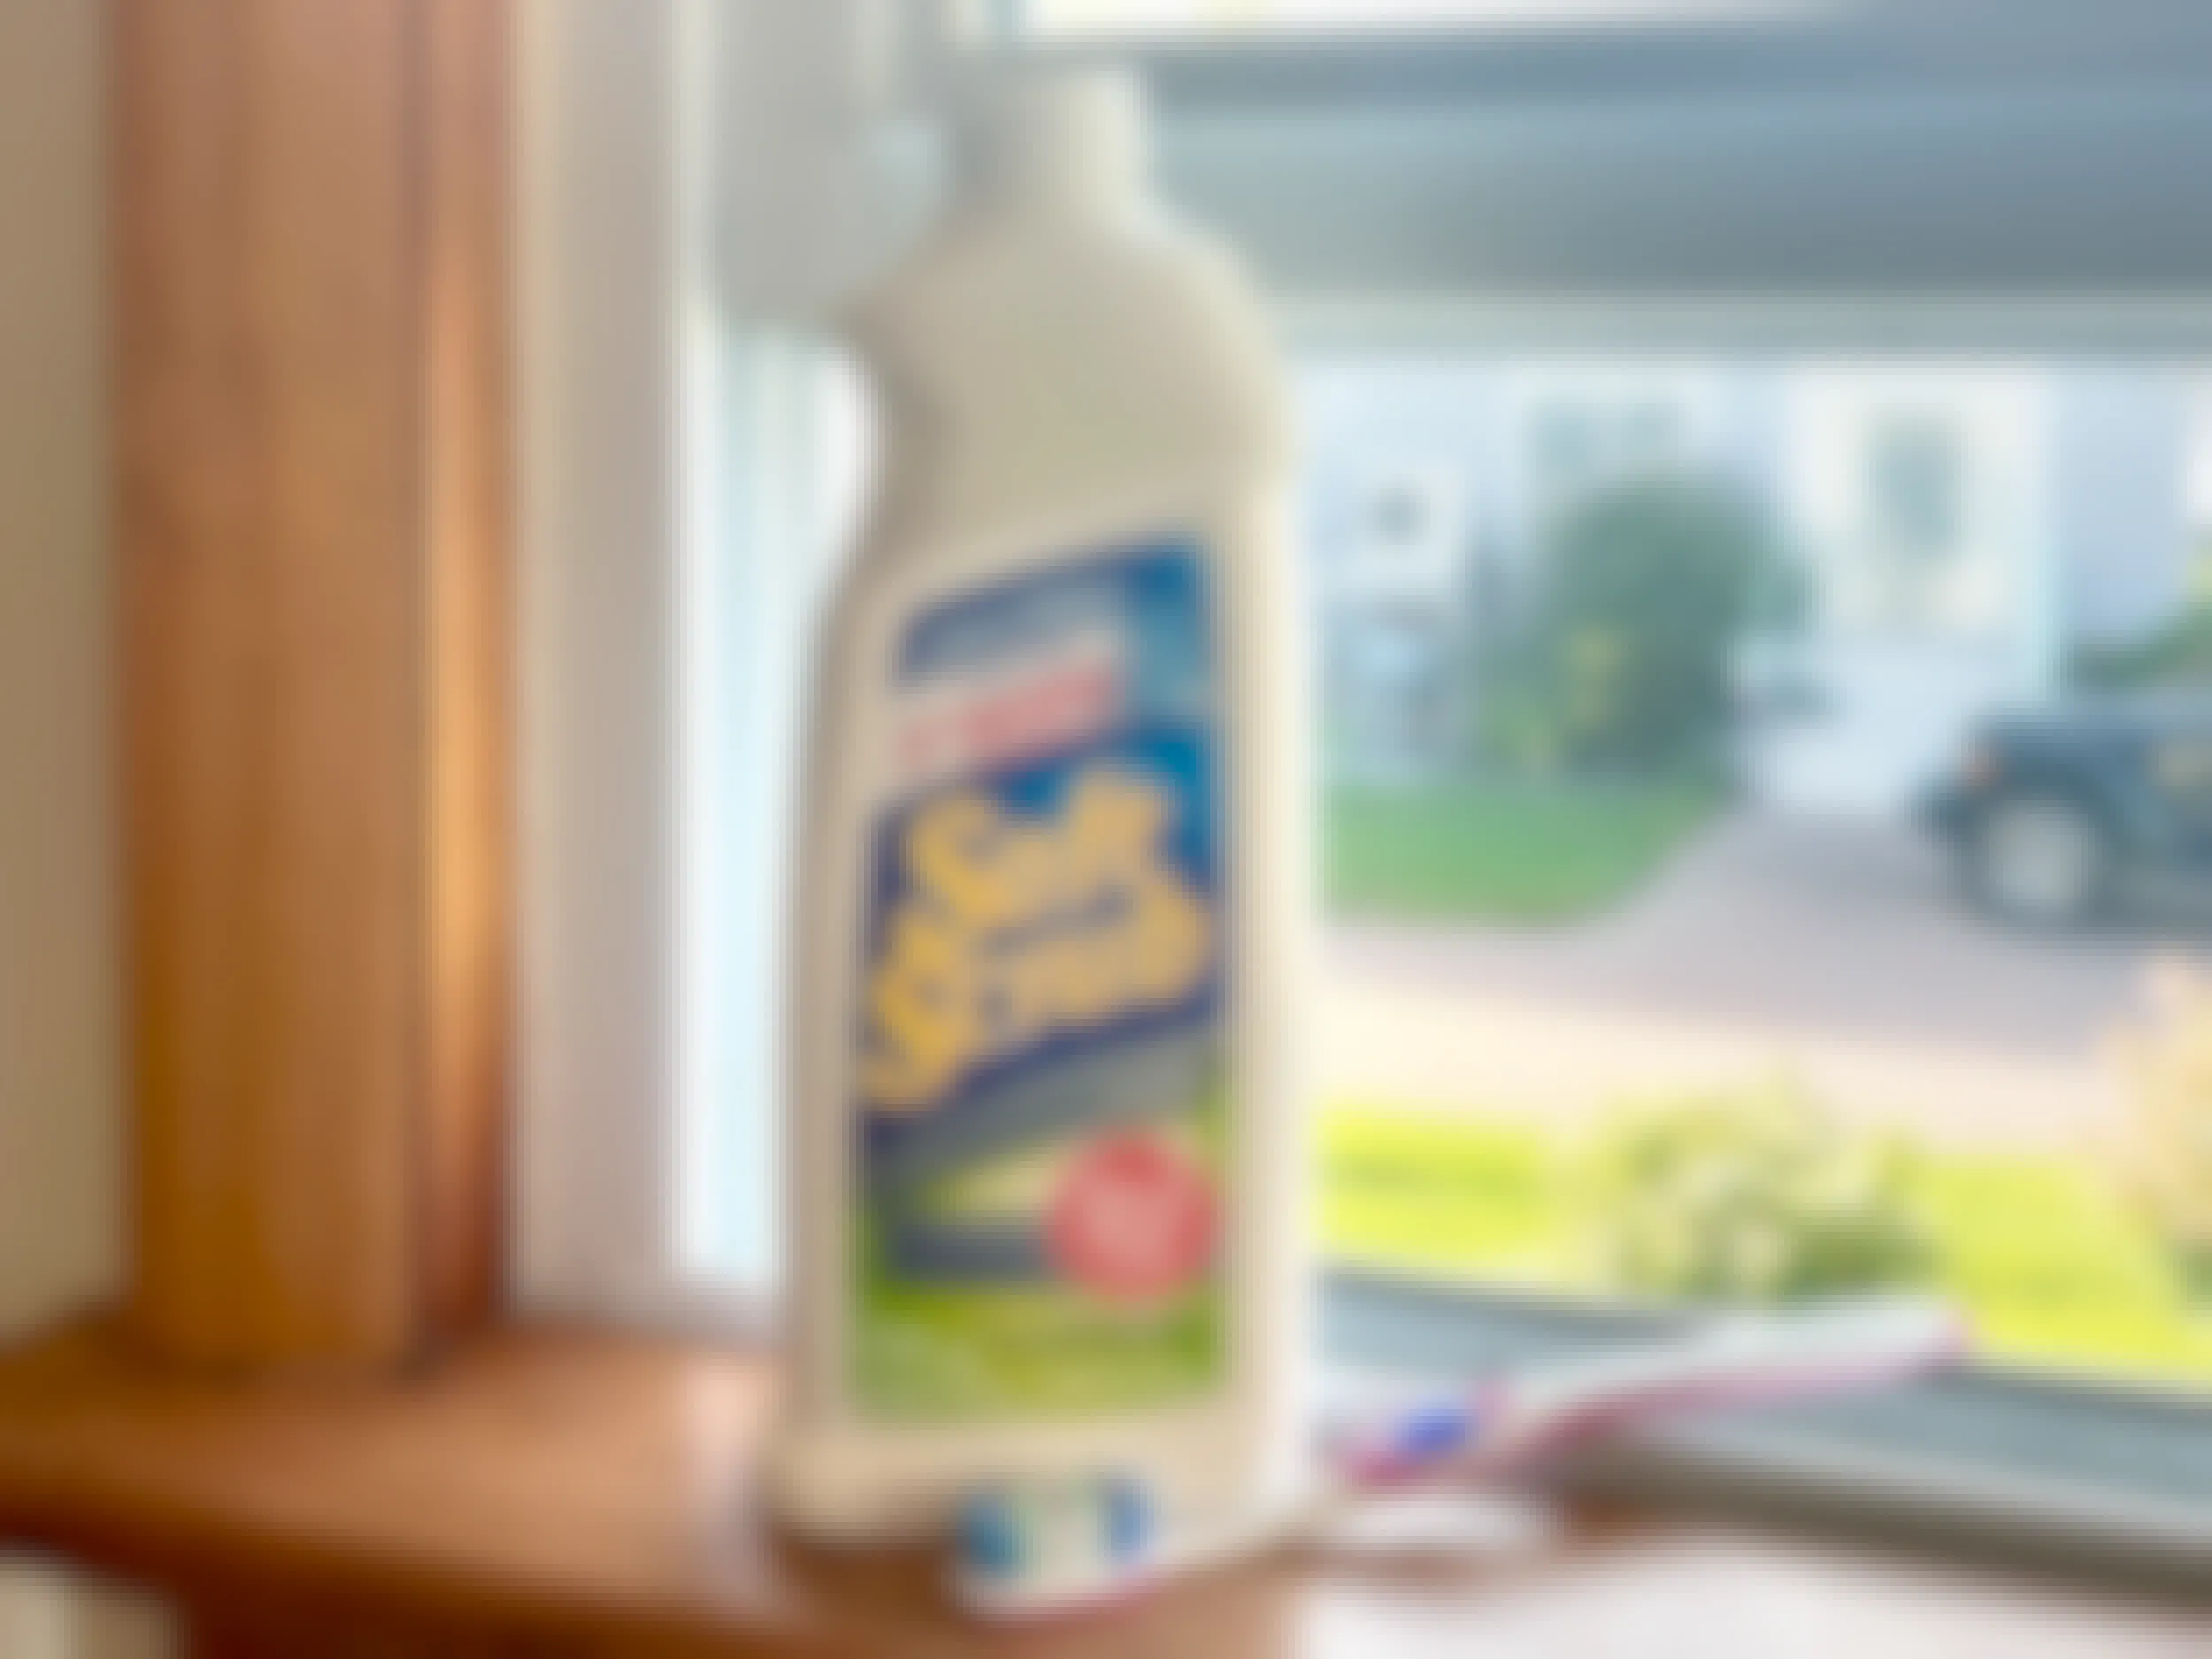 soft scrub cleanser with bleach and toothbrush near windowsill